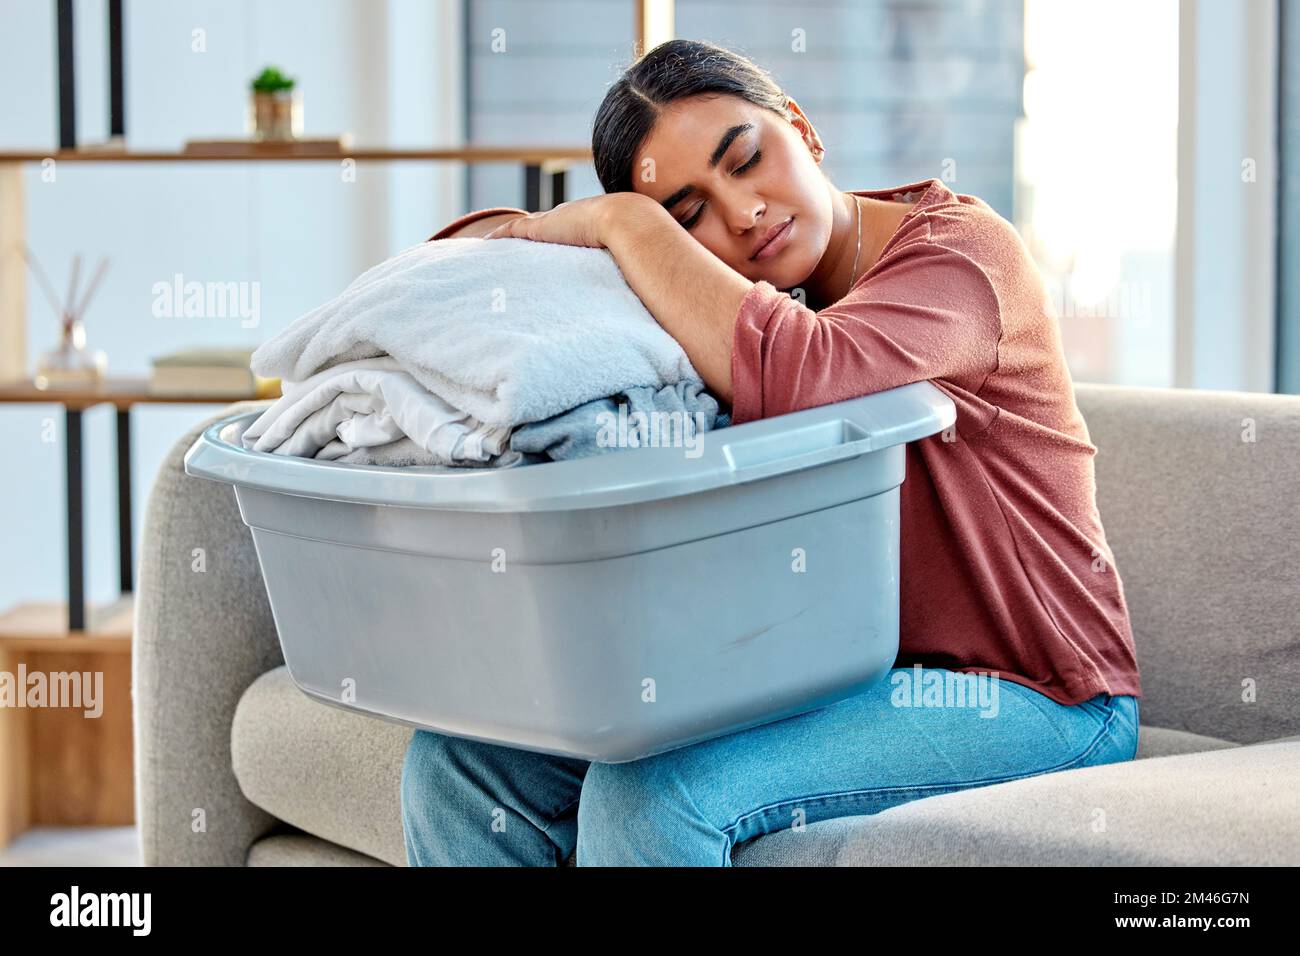 Woman Sleeping And Laundry Basket On Sofa From Cleaning Folded